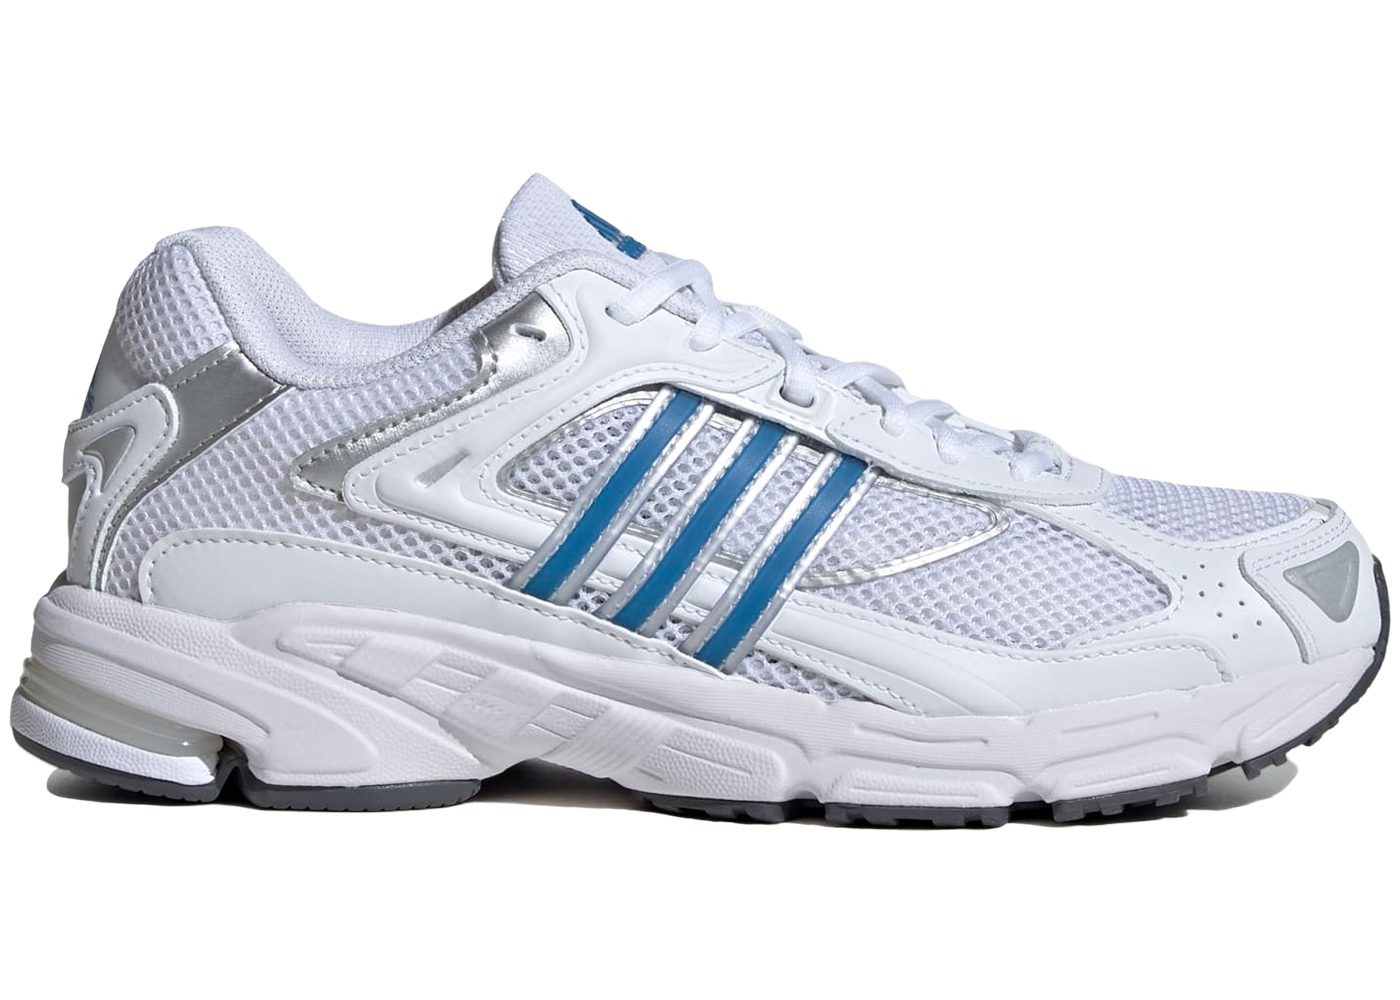 Buy Adidas Womens Response Super DSHGRY/MSILVE/HALBLU Running Shoe - 4 UK  (FY8774) at Amazon.in